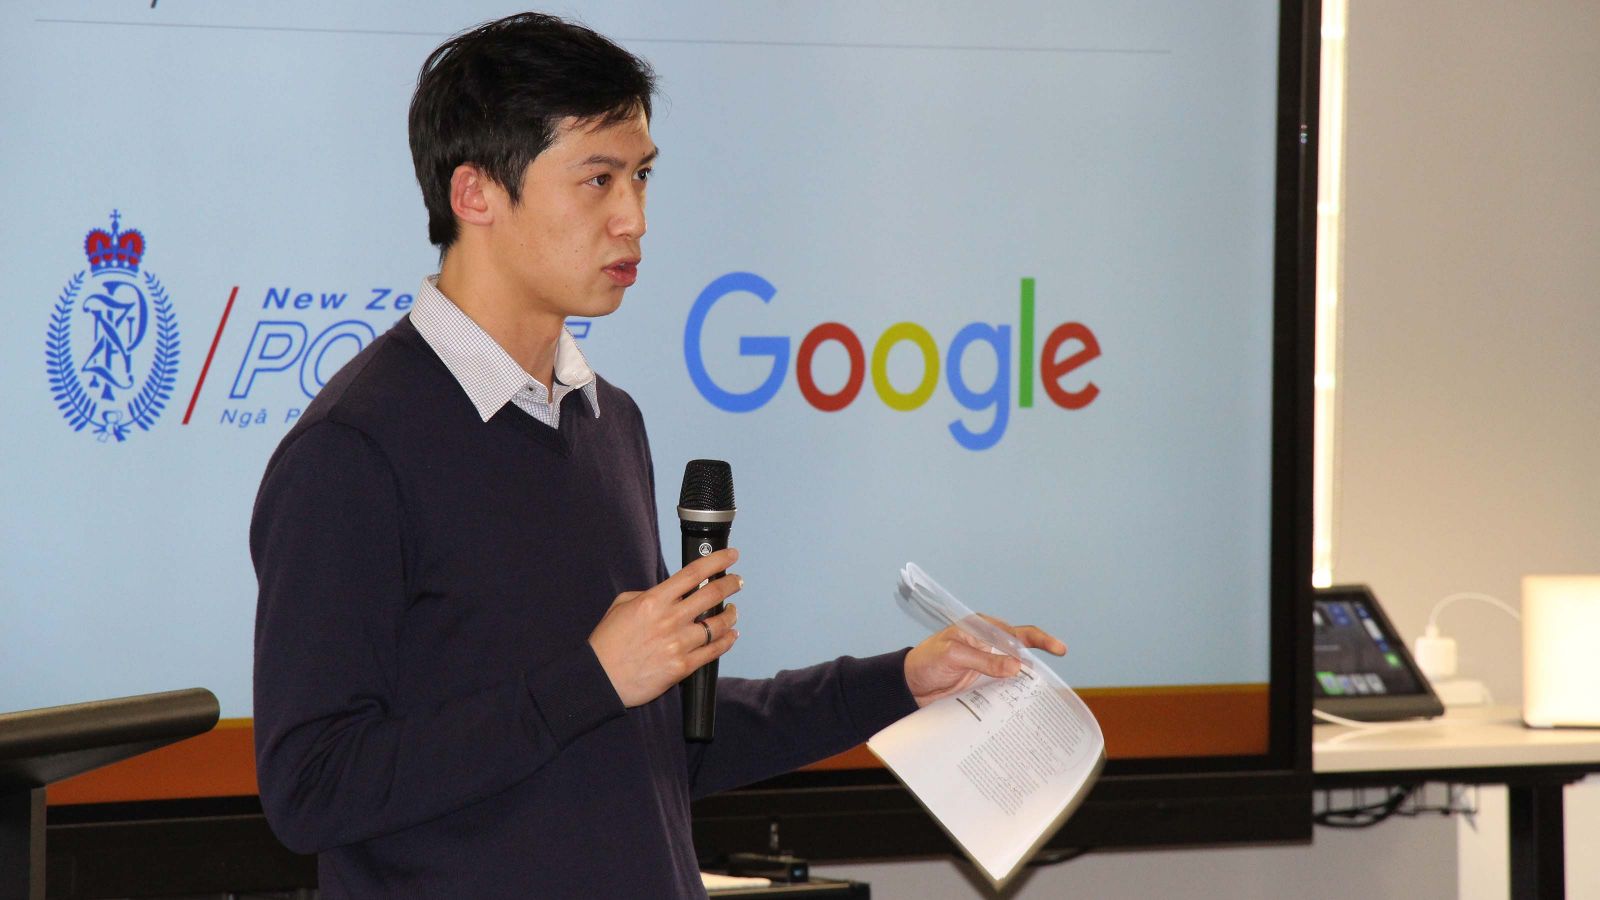 Cameron Lai gives his presentation on the risks of personalised search results